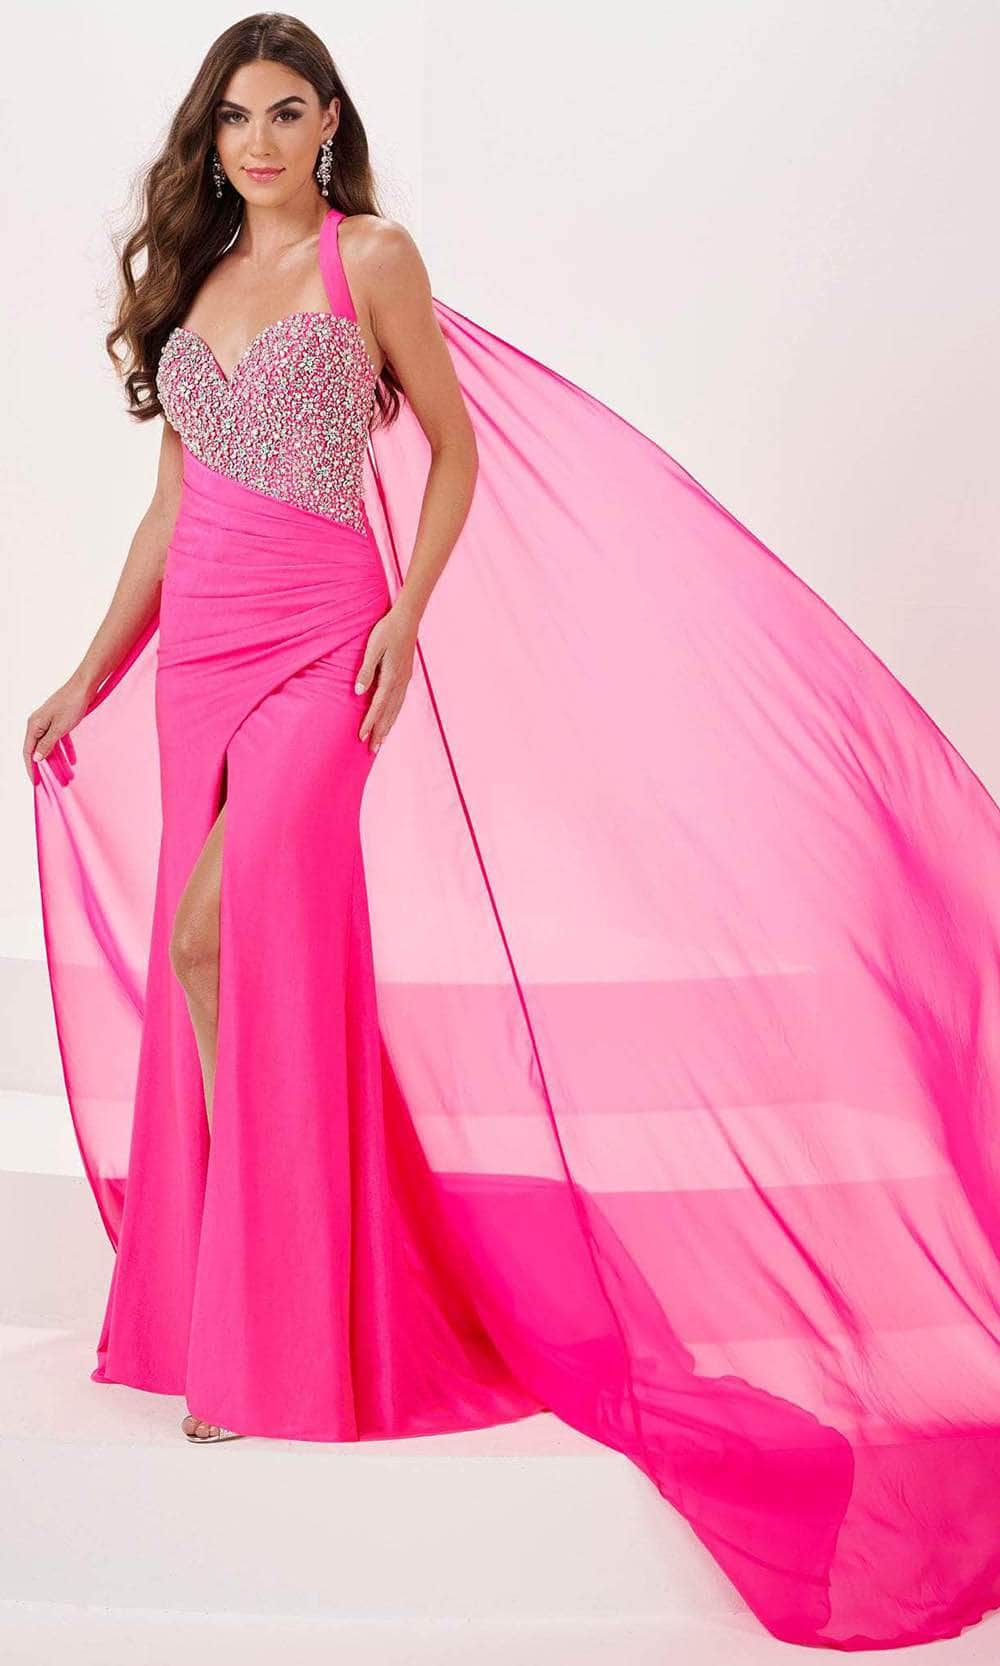 Panoply 14175 - Sweetheart Evening Gown with Slit Evening Dresses 0 / Hot Pink